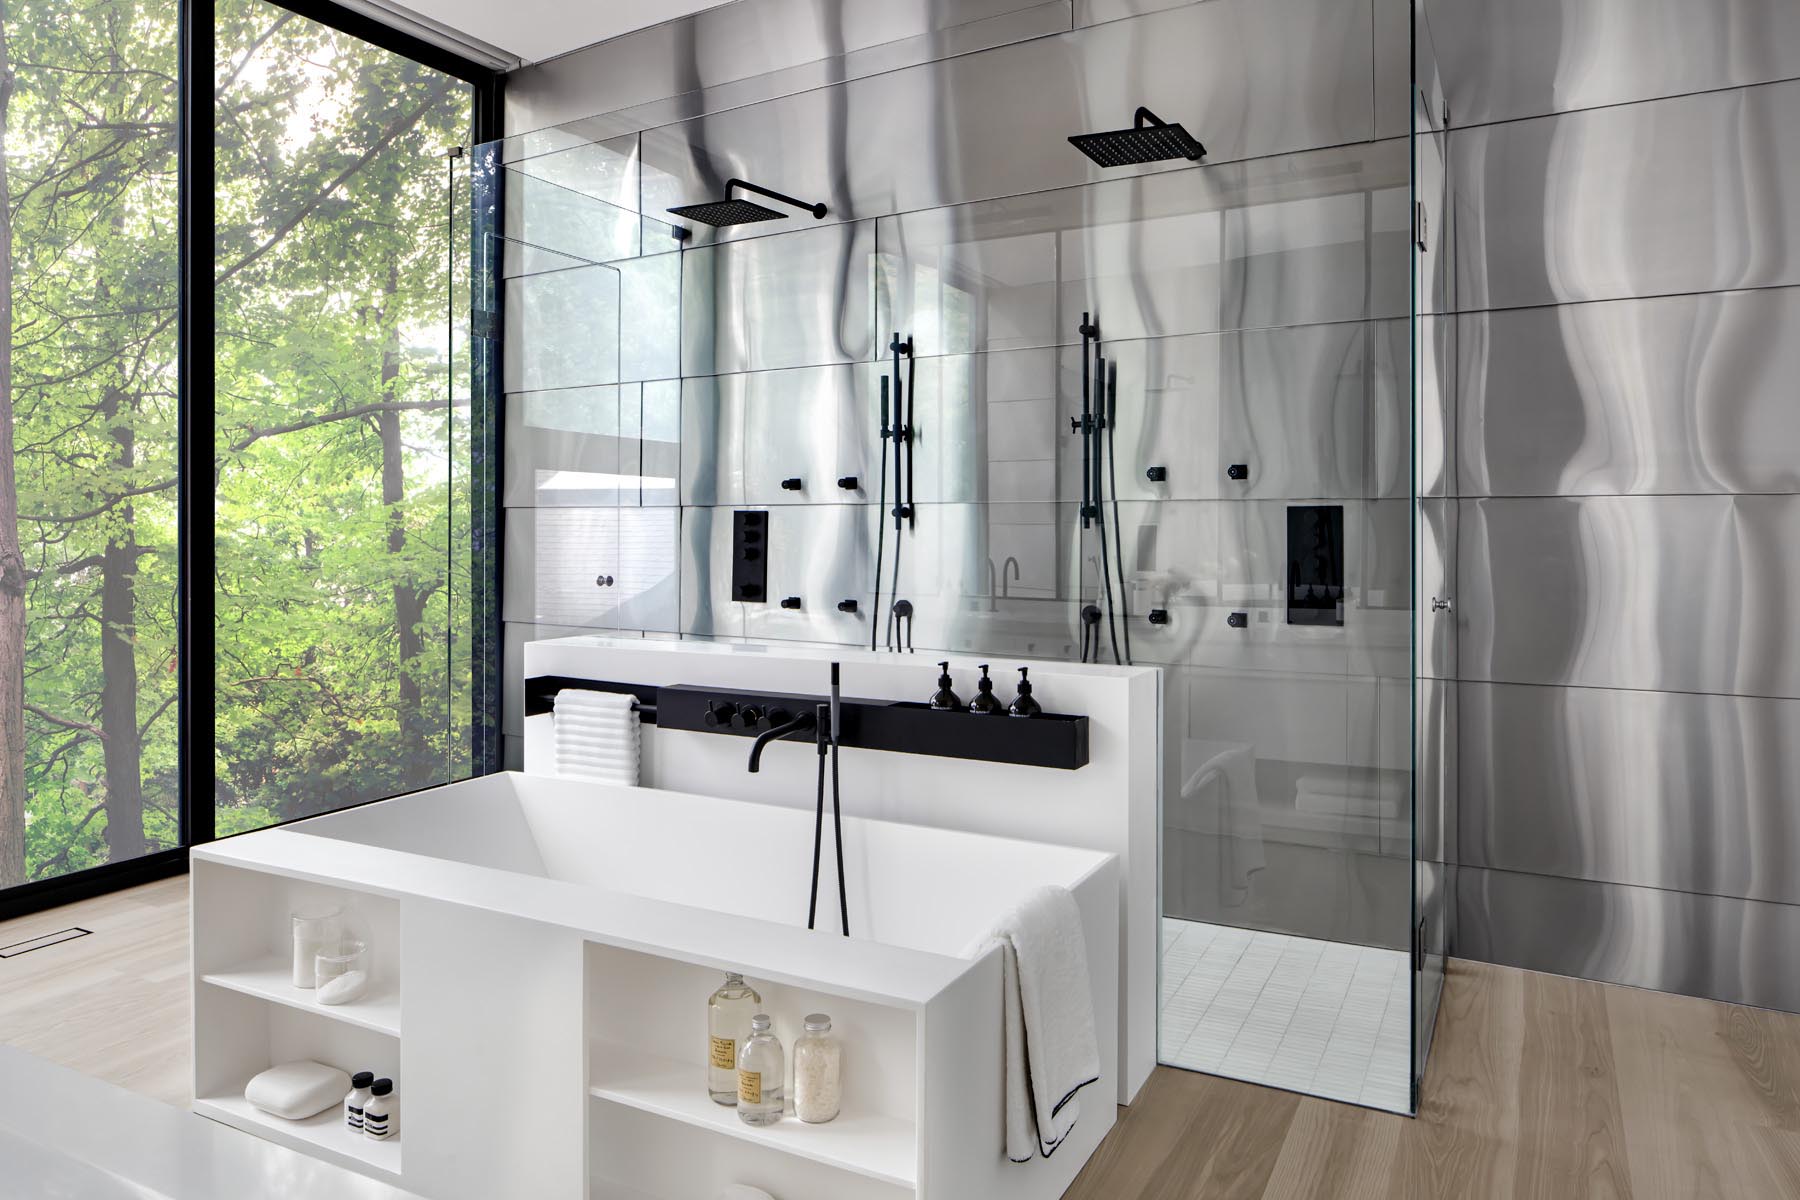 A wall of wood closets link the bedroom to this modern en-suite bathroom, that showcases a white vanity with large mirrors, a built-in bathtub, and a double shower with glass surround.